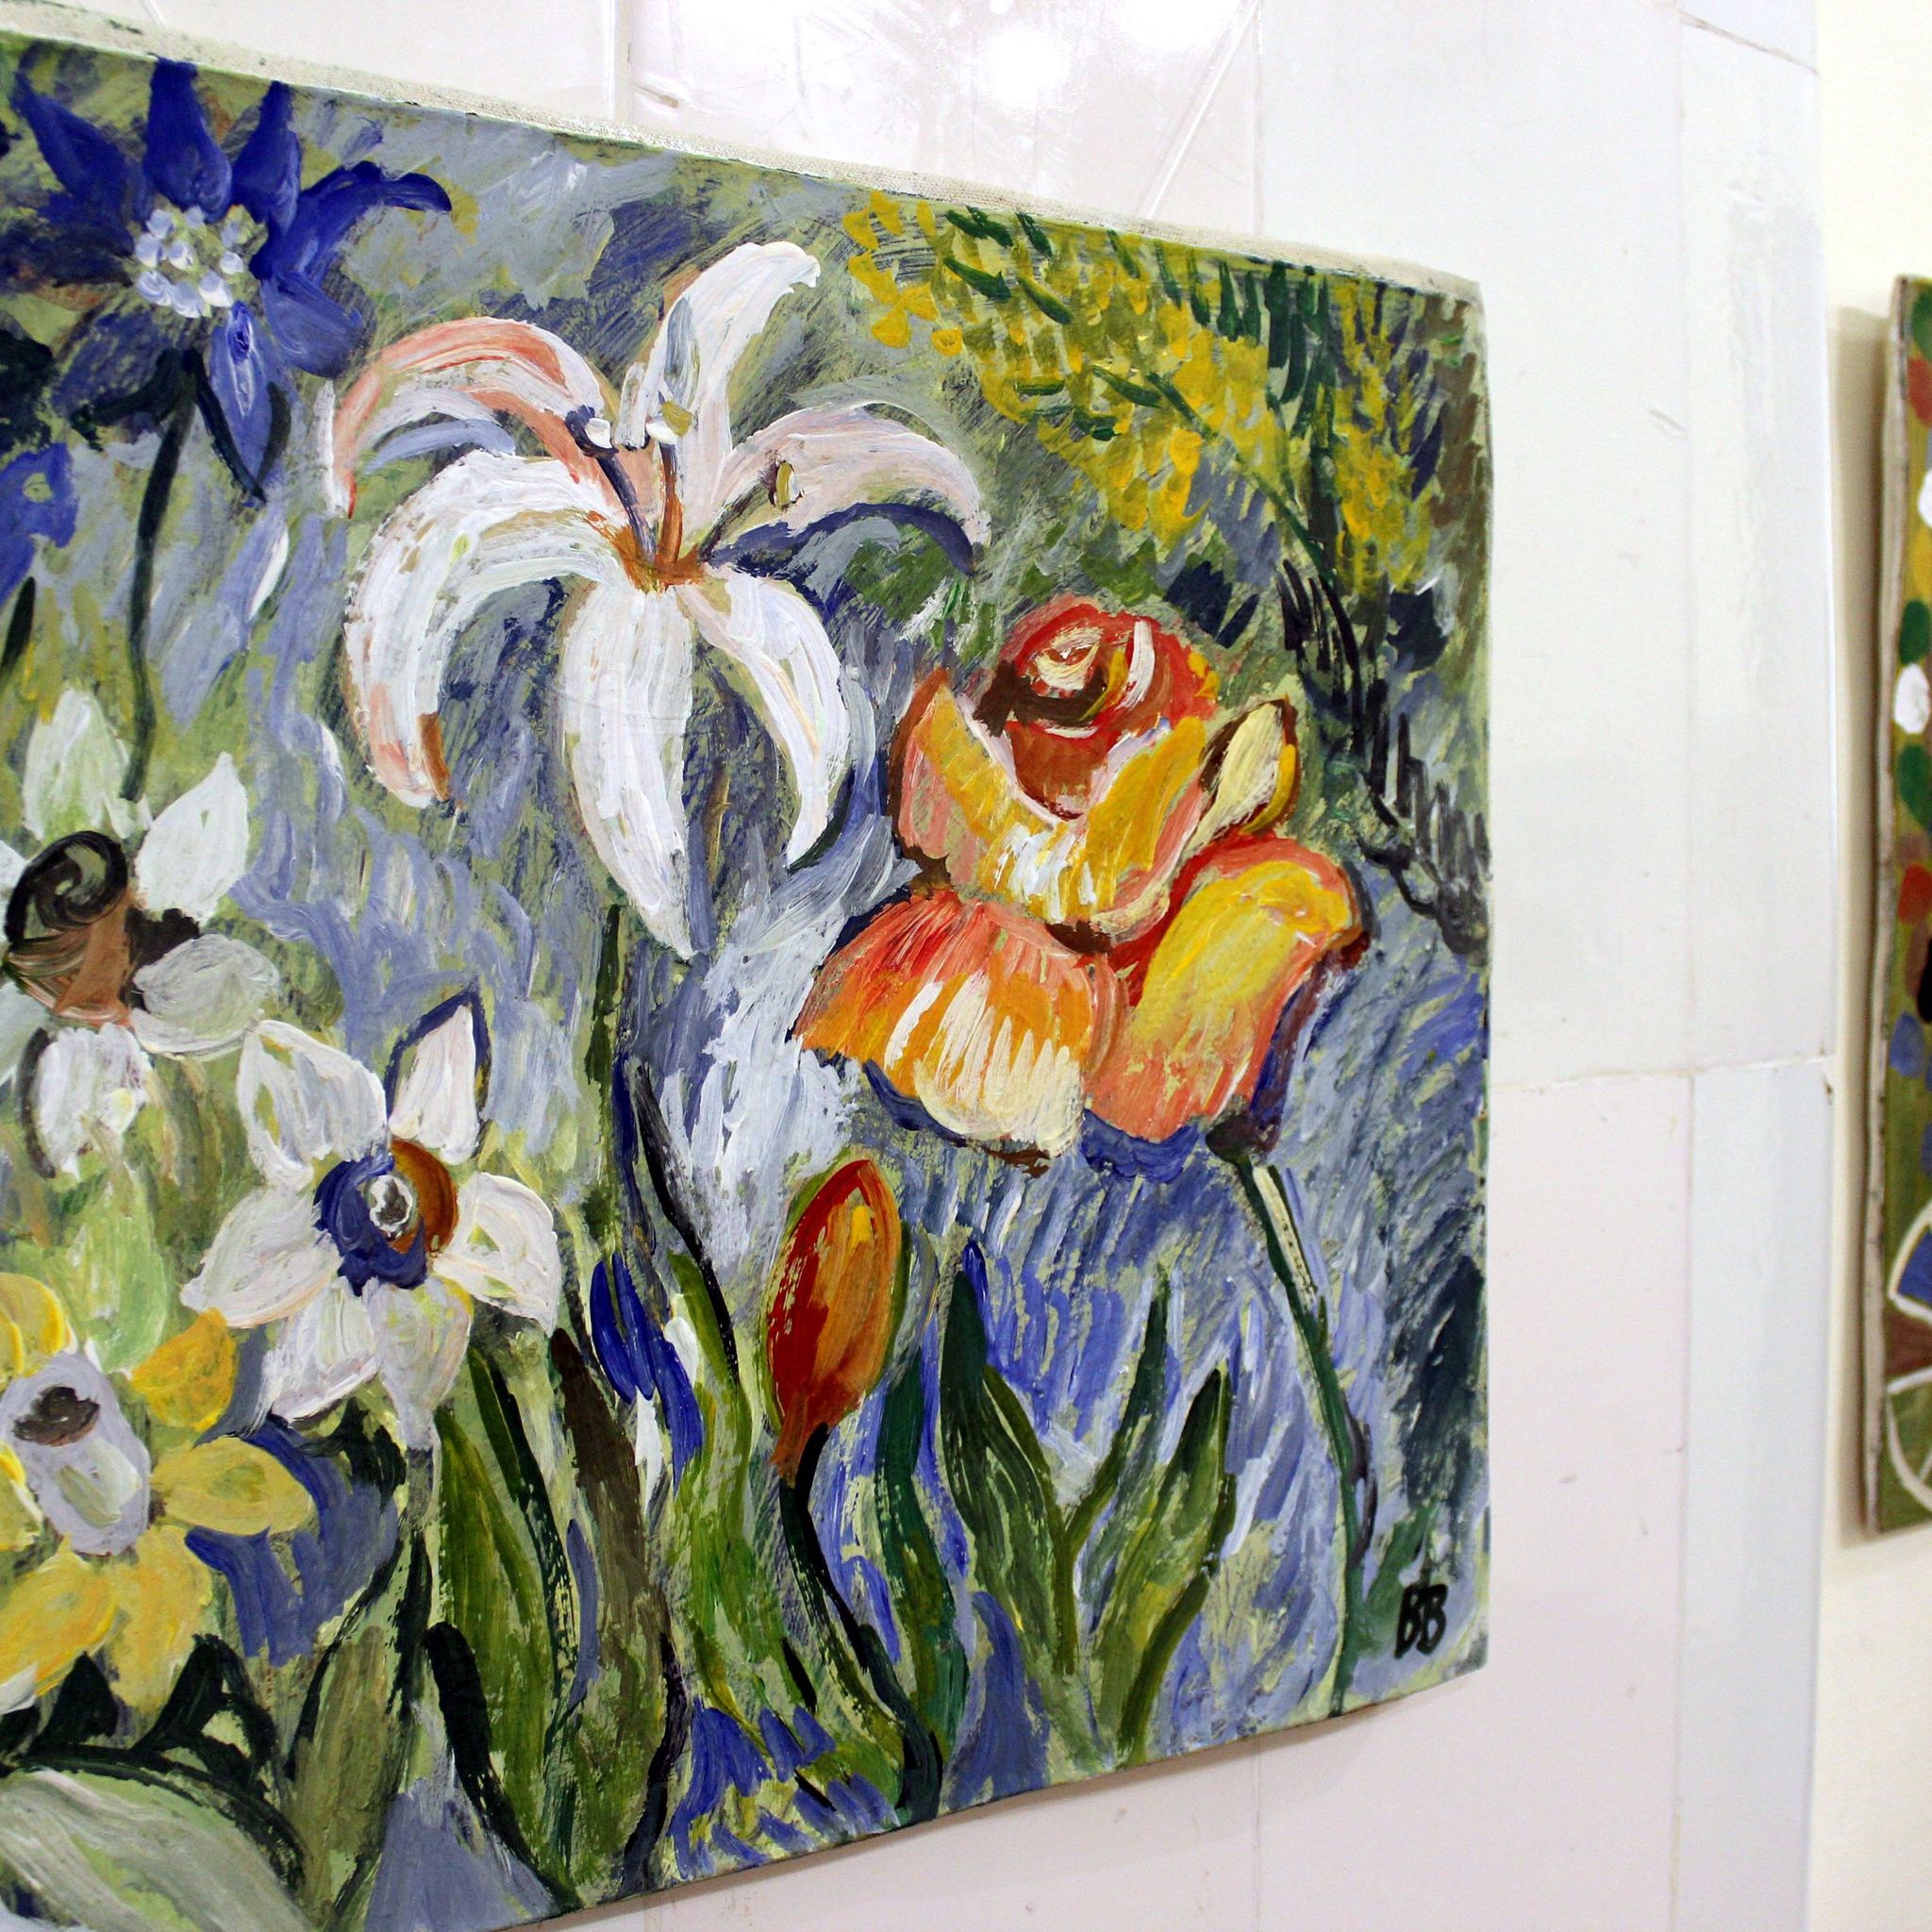 Exhibition of Victor Vinokourov Spring in the city of E.